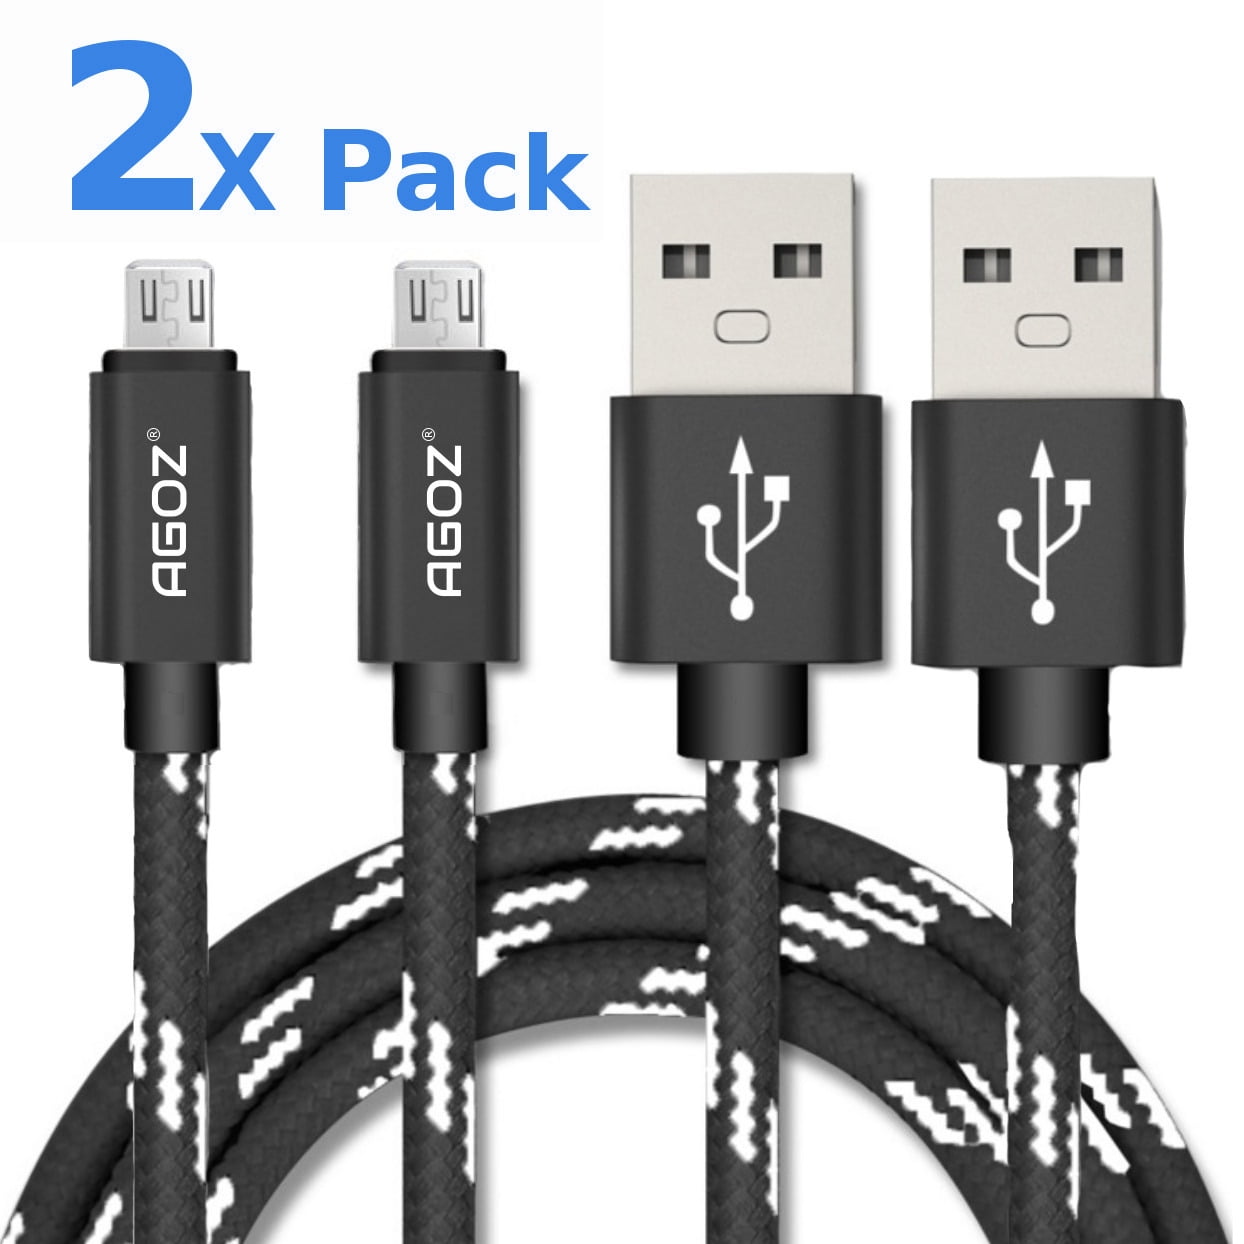 Quick Charger Cable for Sony PS4/Dual Shock 4 Charge/Android/Samsung/Xbox One/Echo Dot/HTC/Motorola/Nexus/Nokia and More Black 2Pack 15FT PS4 Micro USB Cable, Extra Long Durable Charging Cord 